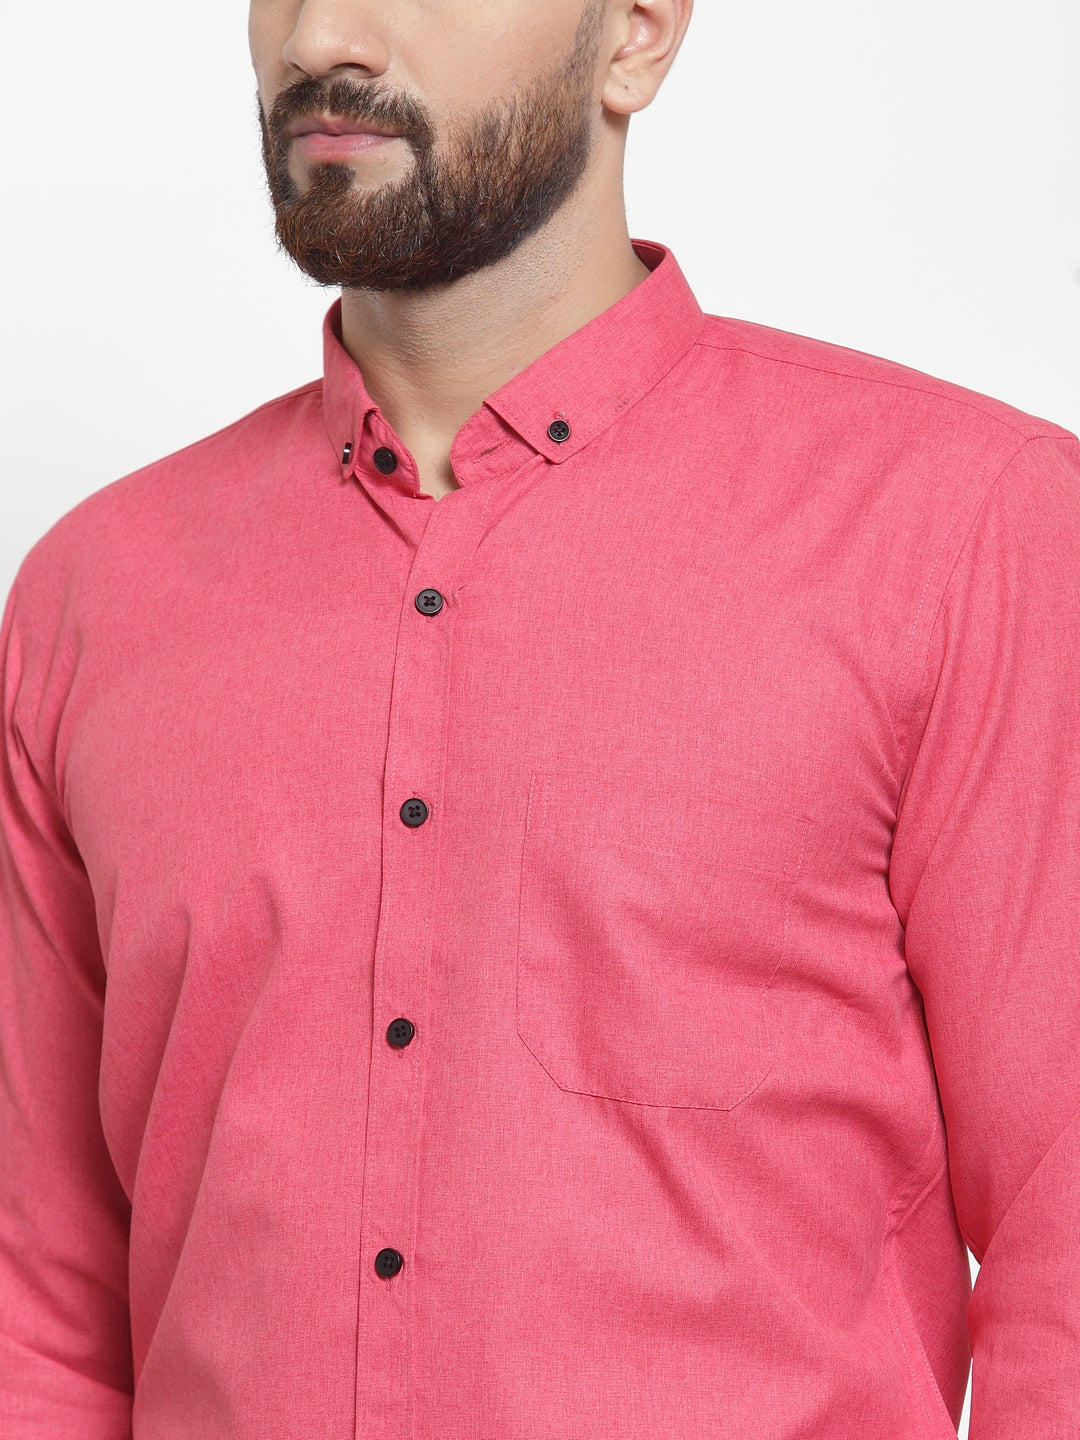 Men's Red Cotton Solid Button Down Formal Shirts ( SF 734Red ) - Jainish